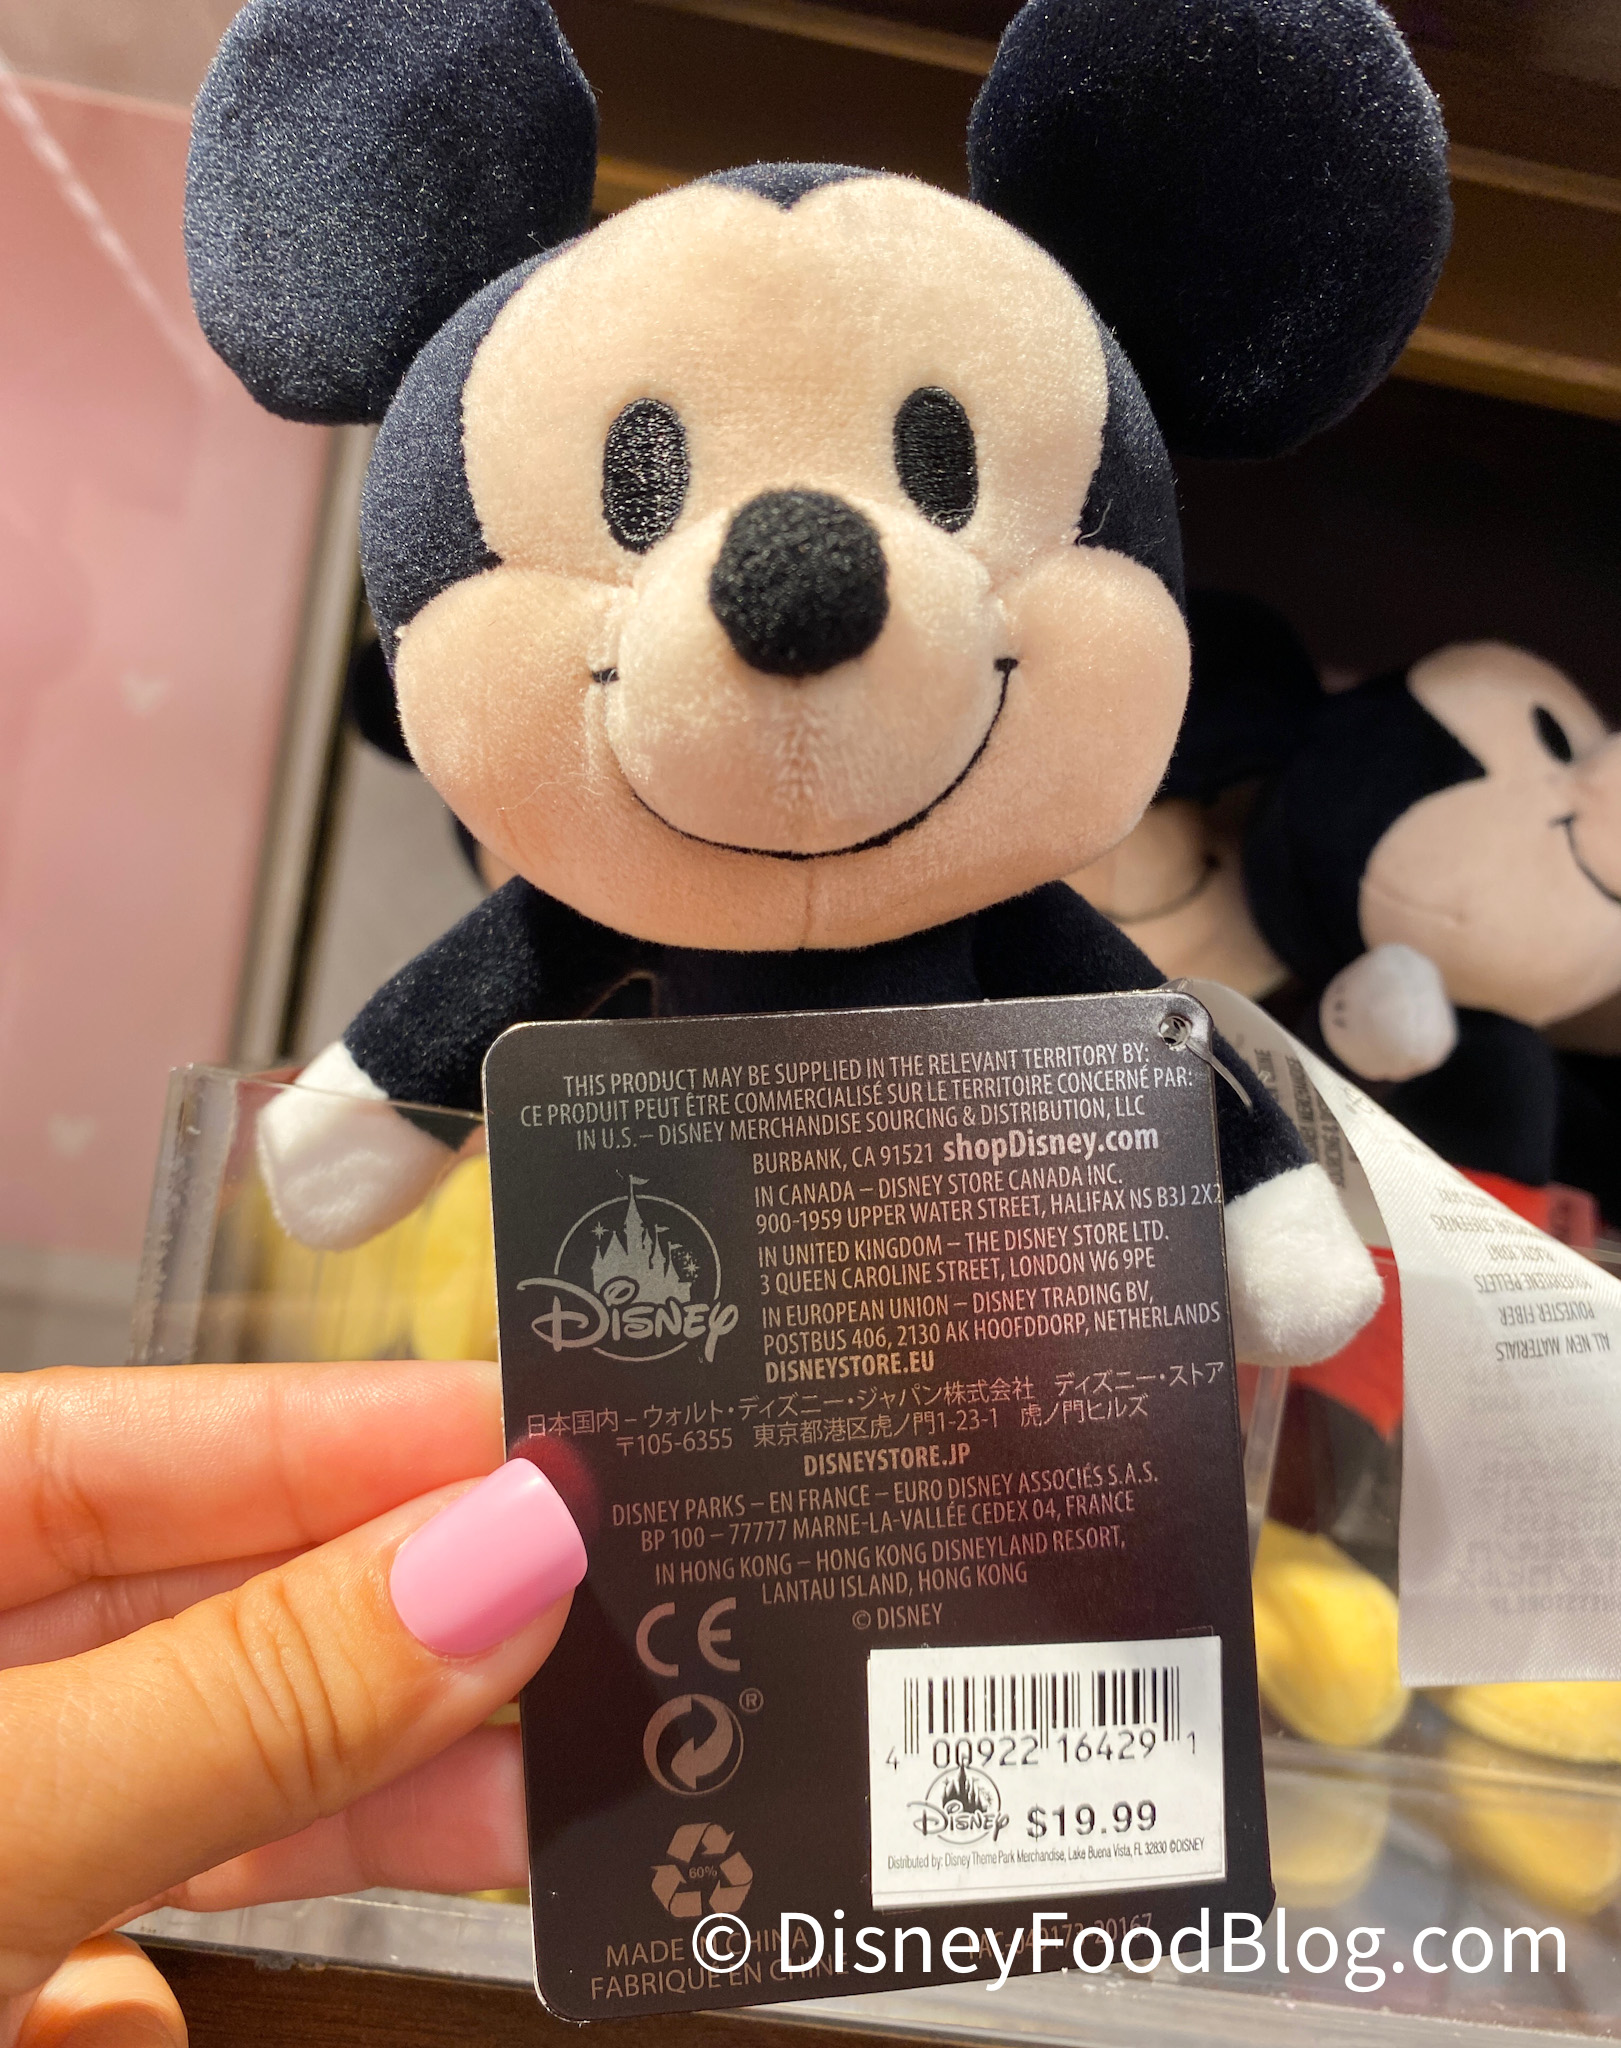 Disney nuiMOs Just Got MORE Expensive!